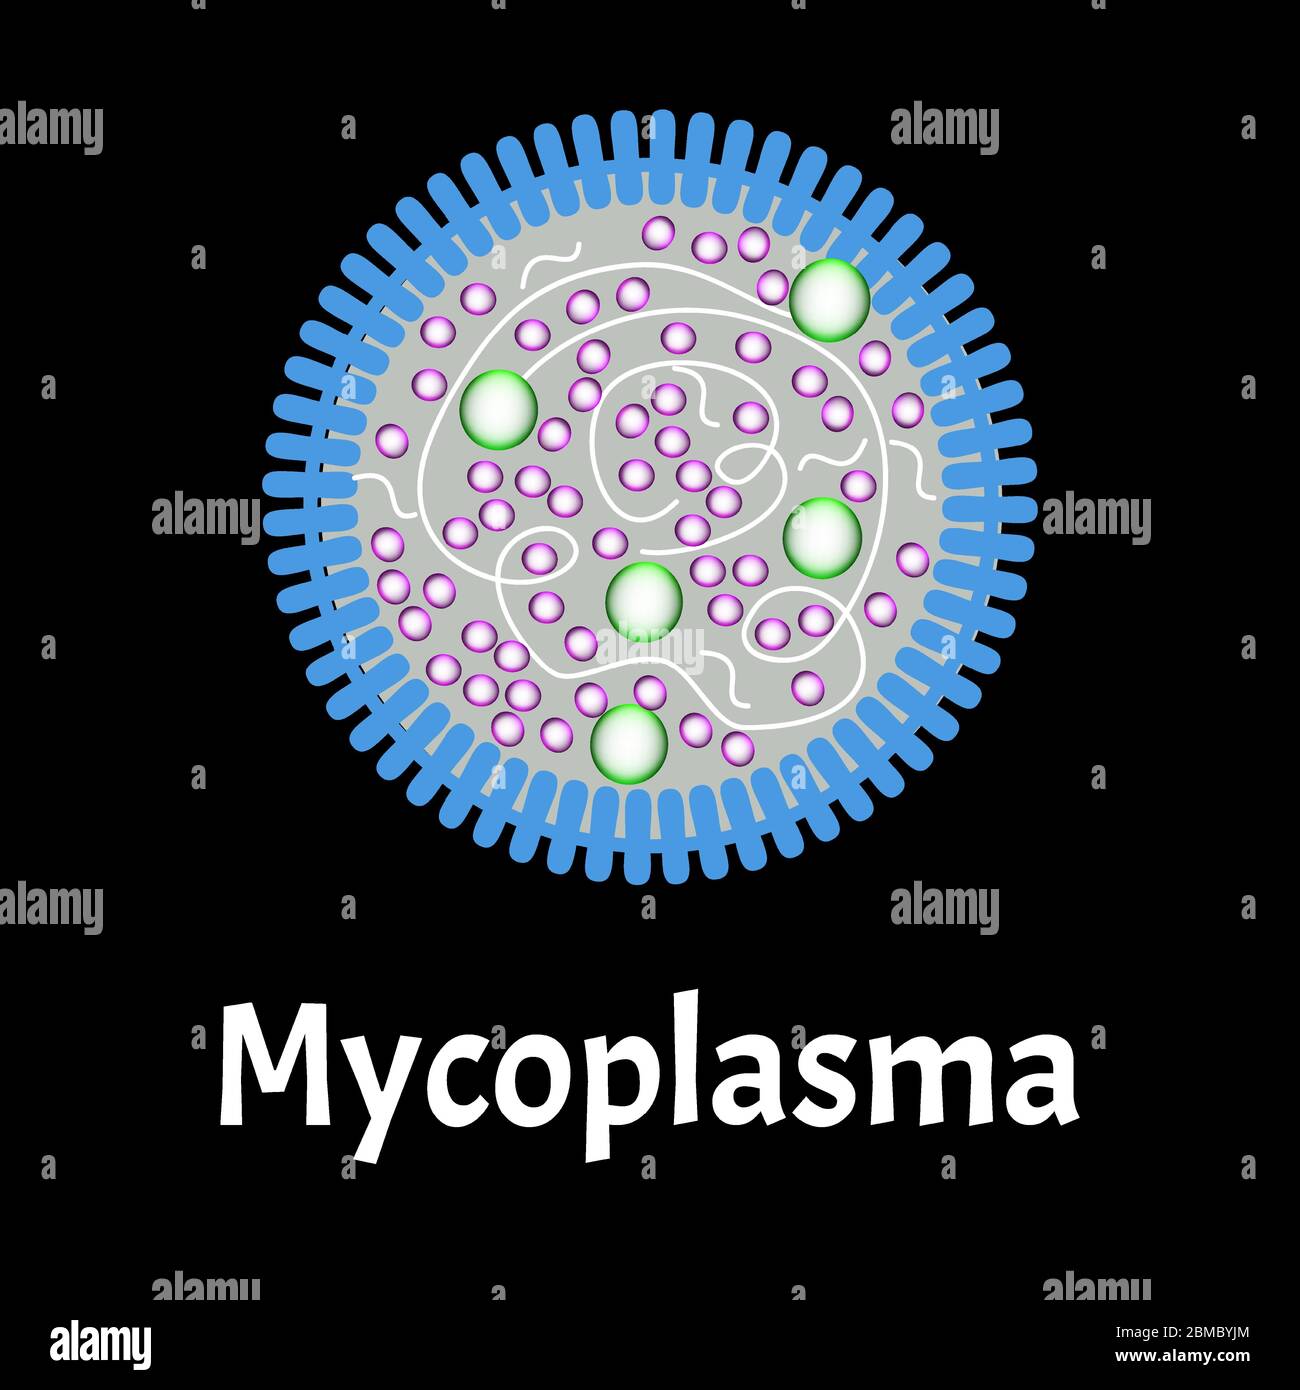 Mycoplasma. Bacterial infections Mycoplasma. Sexually transmitted diseases. Infographics. Vector illustration on isolated background. Stock Vector